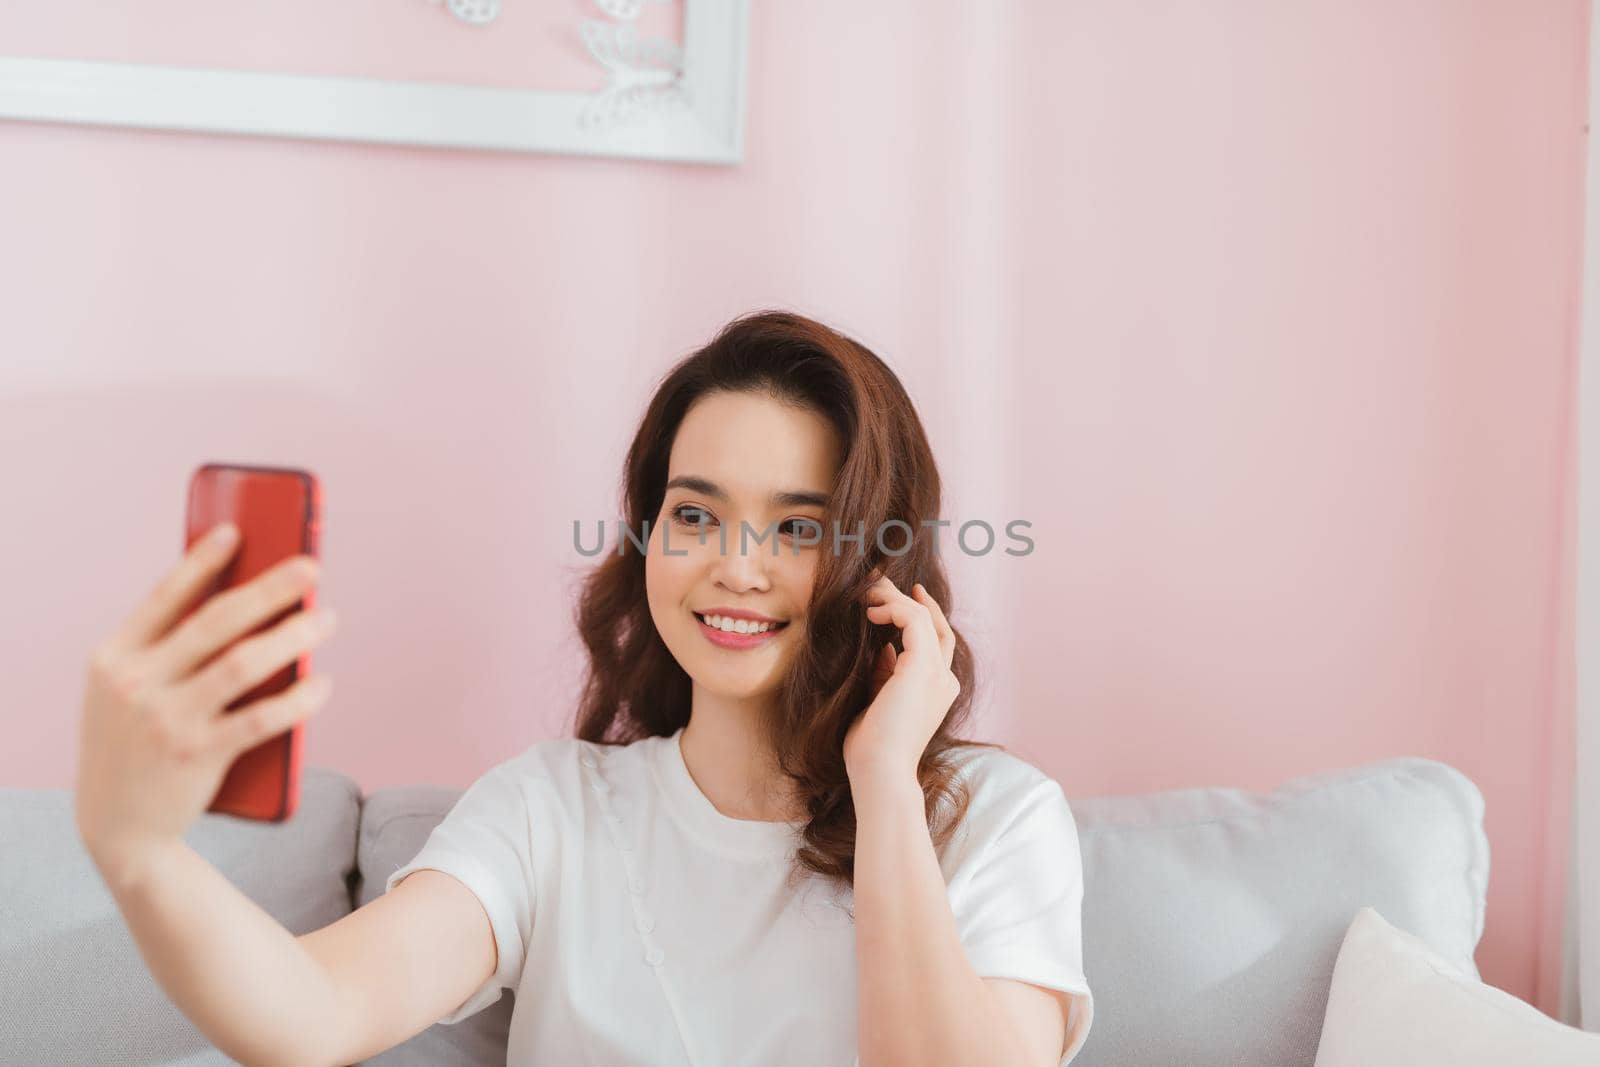 Attractive smiling young asian woman wearing casual clothes sitting on a couch, taking a selfie